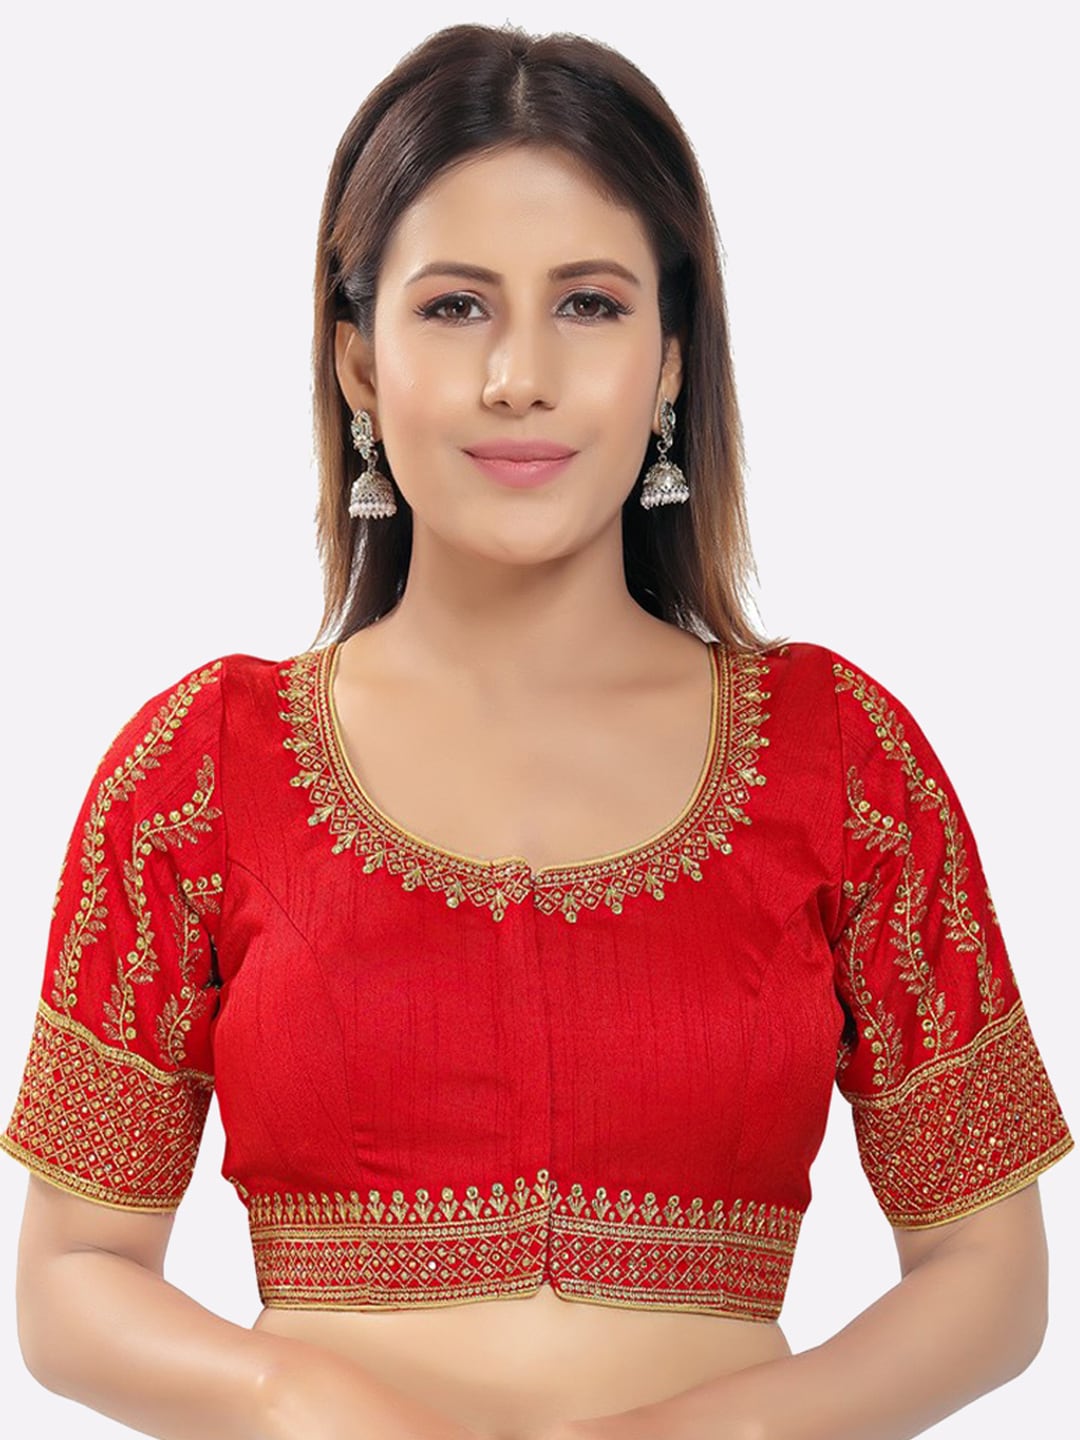 SALWAR STUDIO Women Red Embroidered Ready Made Saree Blouse Price in India